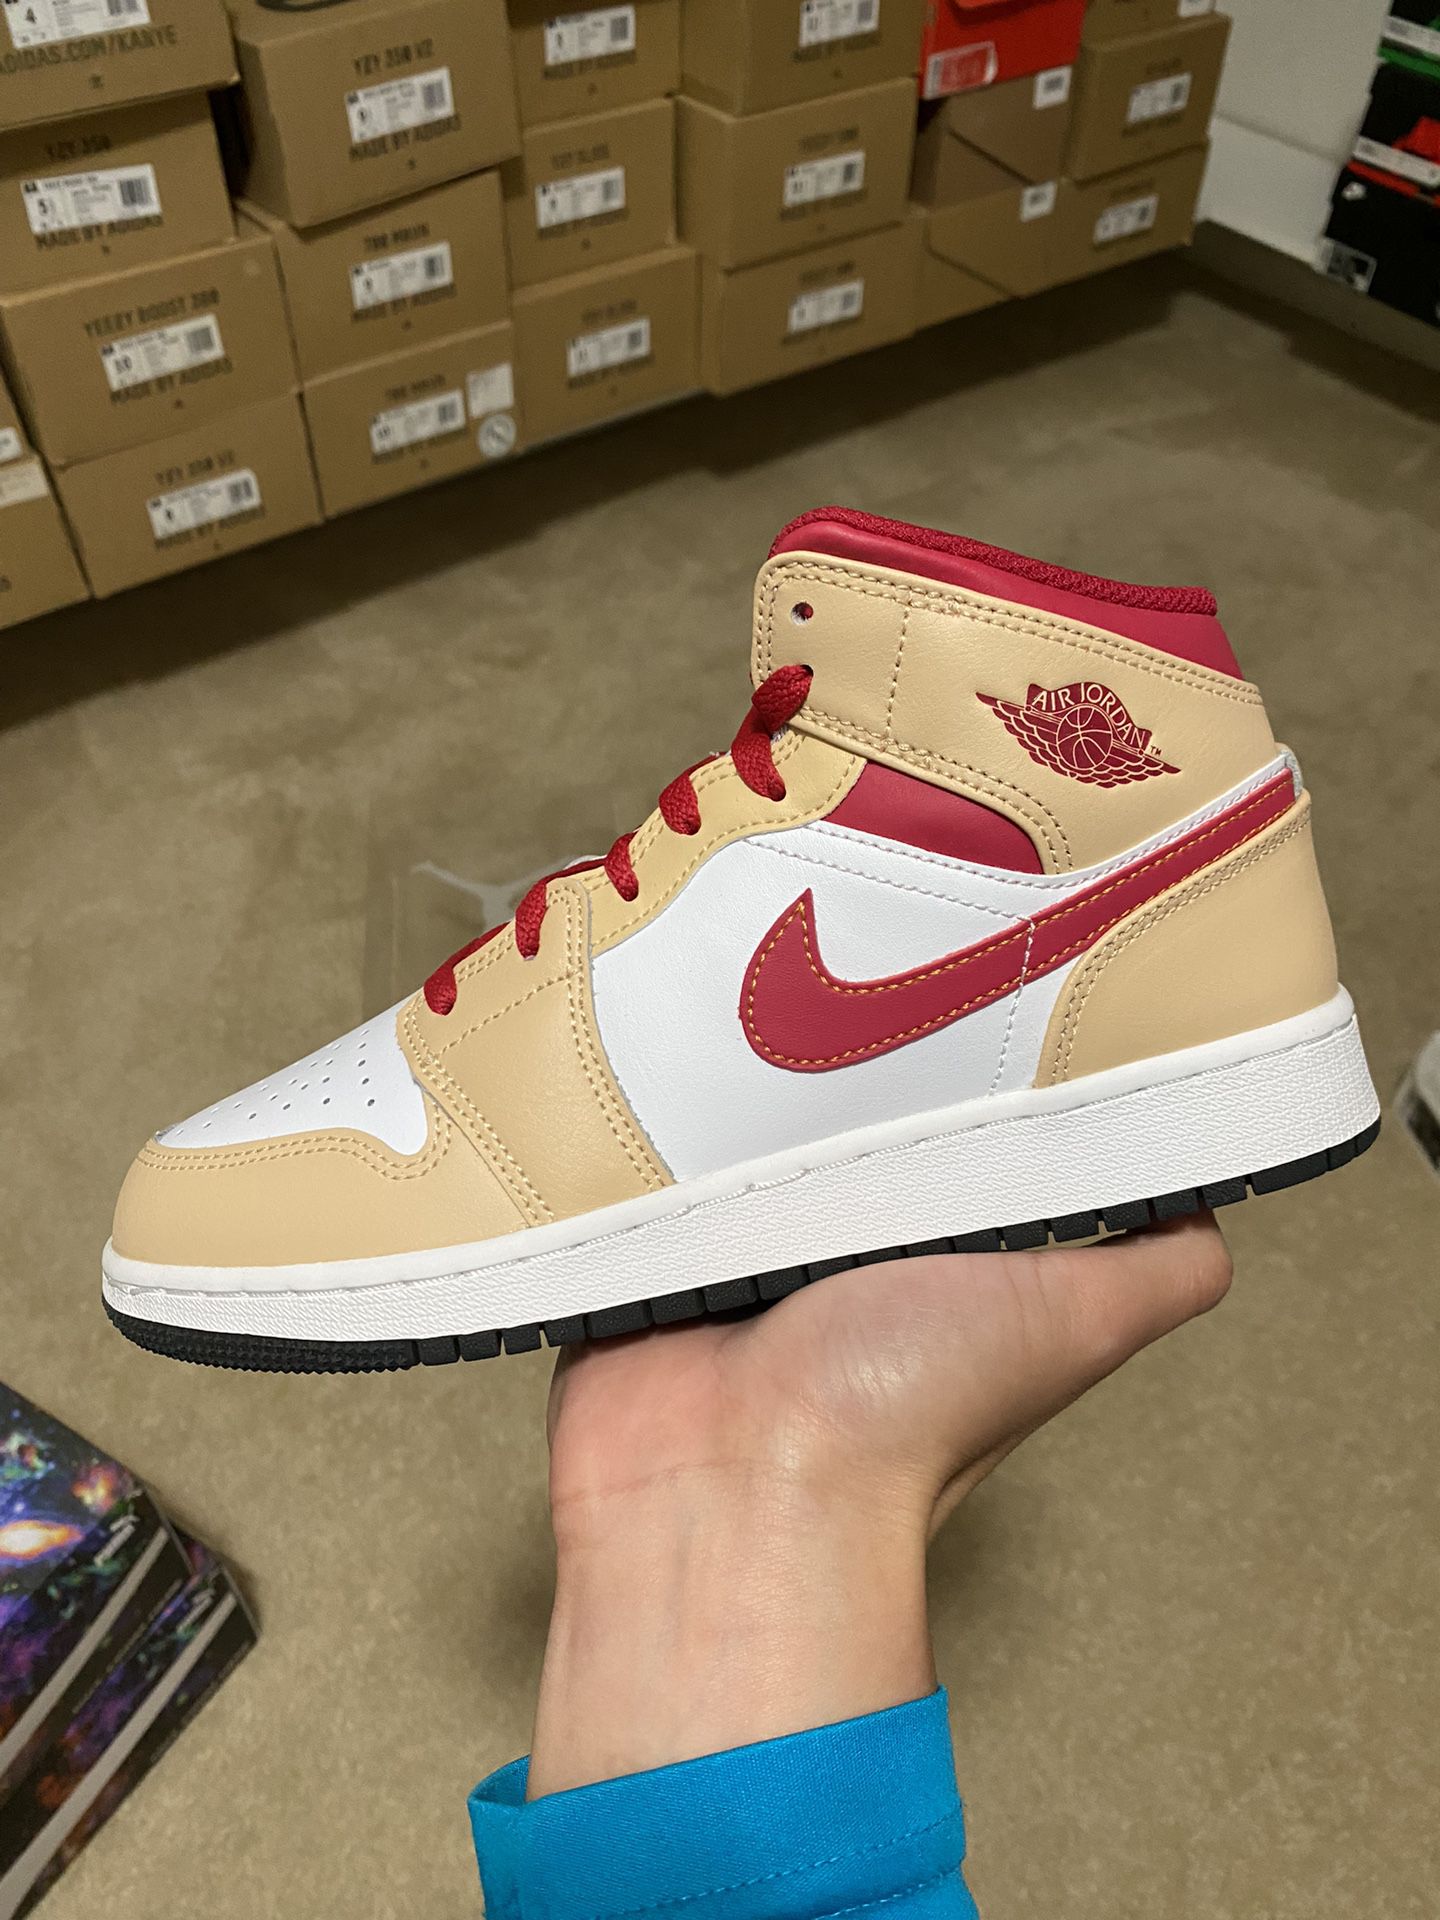 Size 6Y / 7.5W - Nike Air Jordan 1 Mid White Onyx Light Curry Red